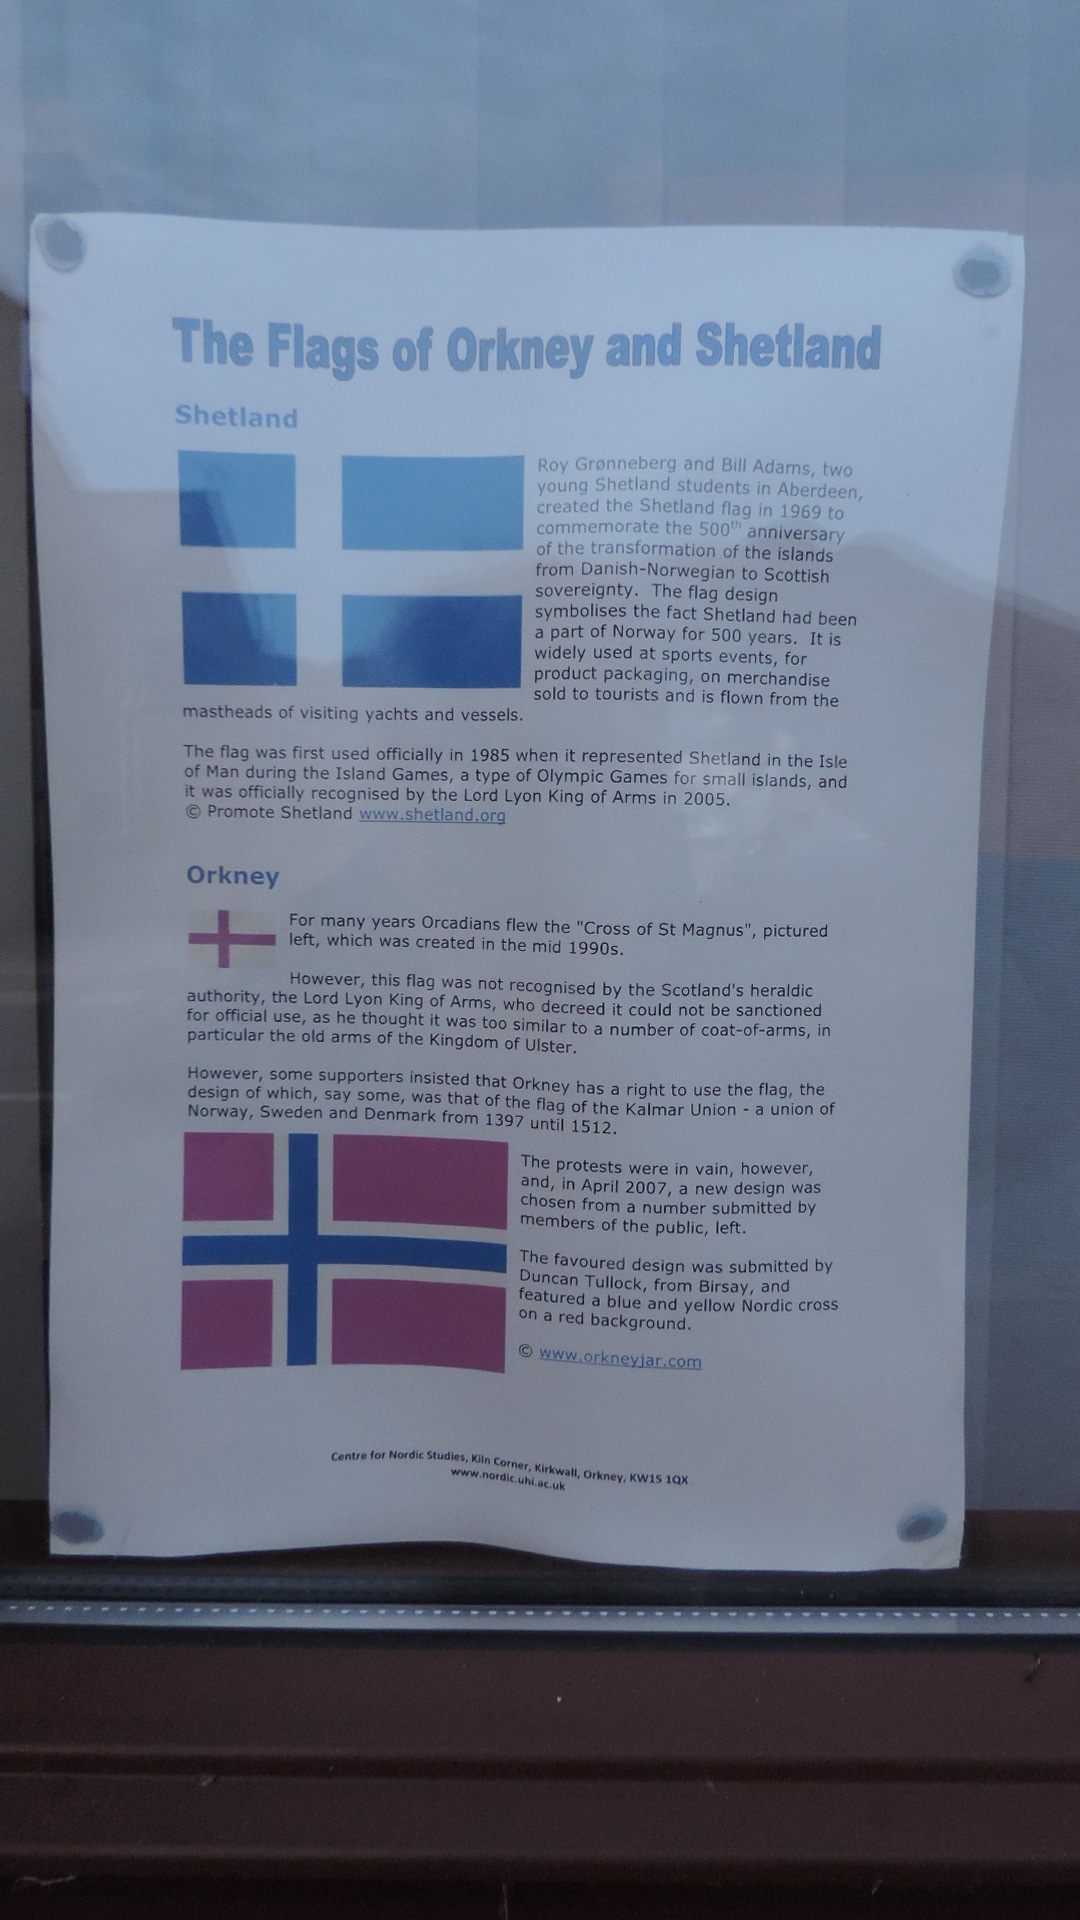 flags of Shetland and Orkney